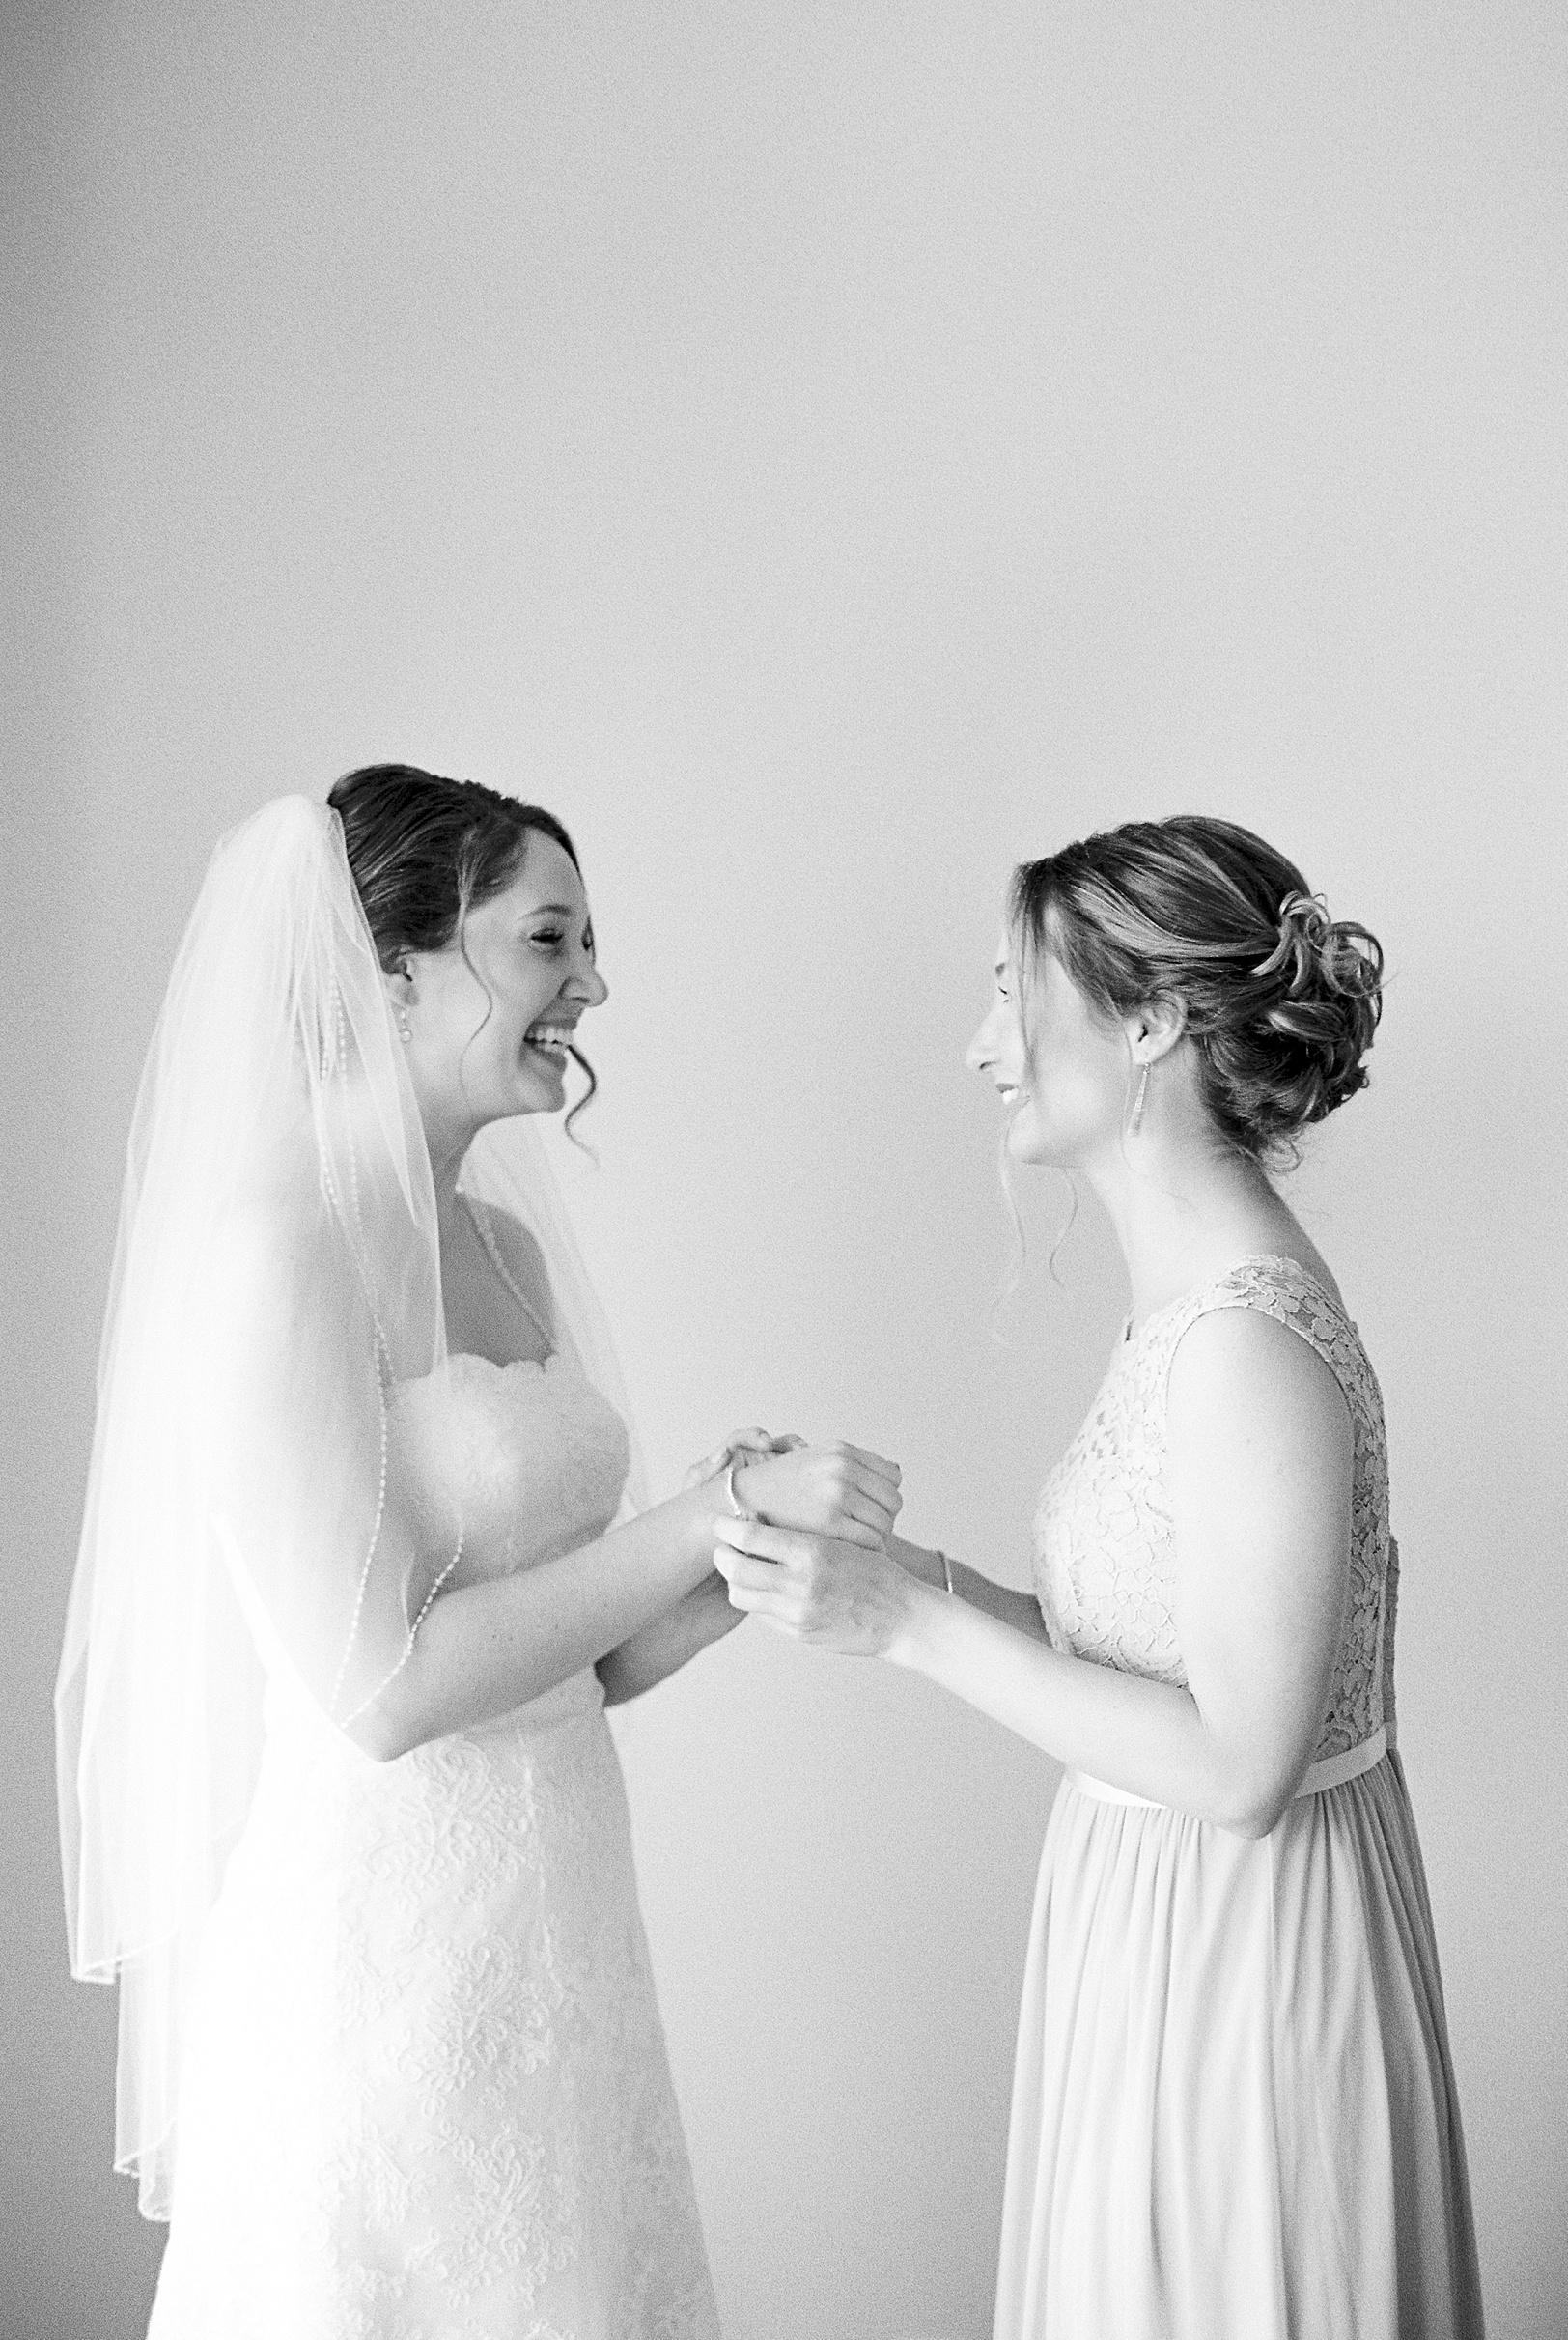 Black and White of Laughing Sisters on Wedding Day | Kaitlin Scott Photography